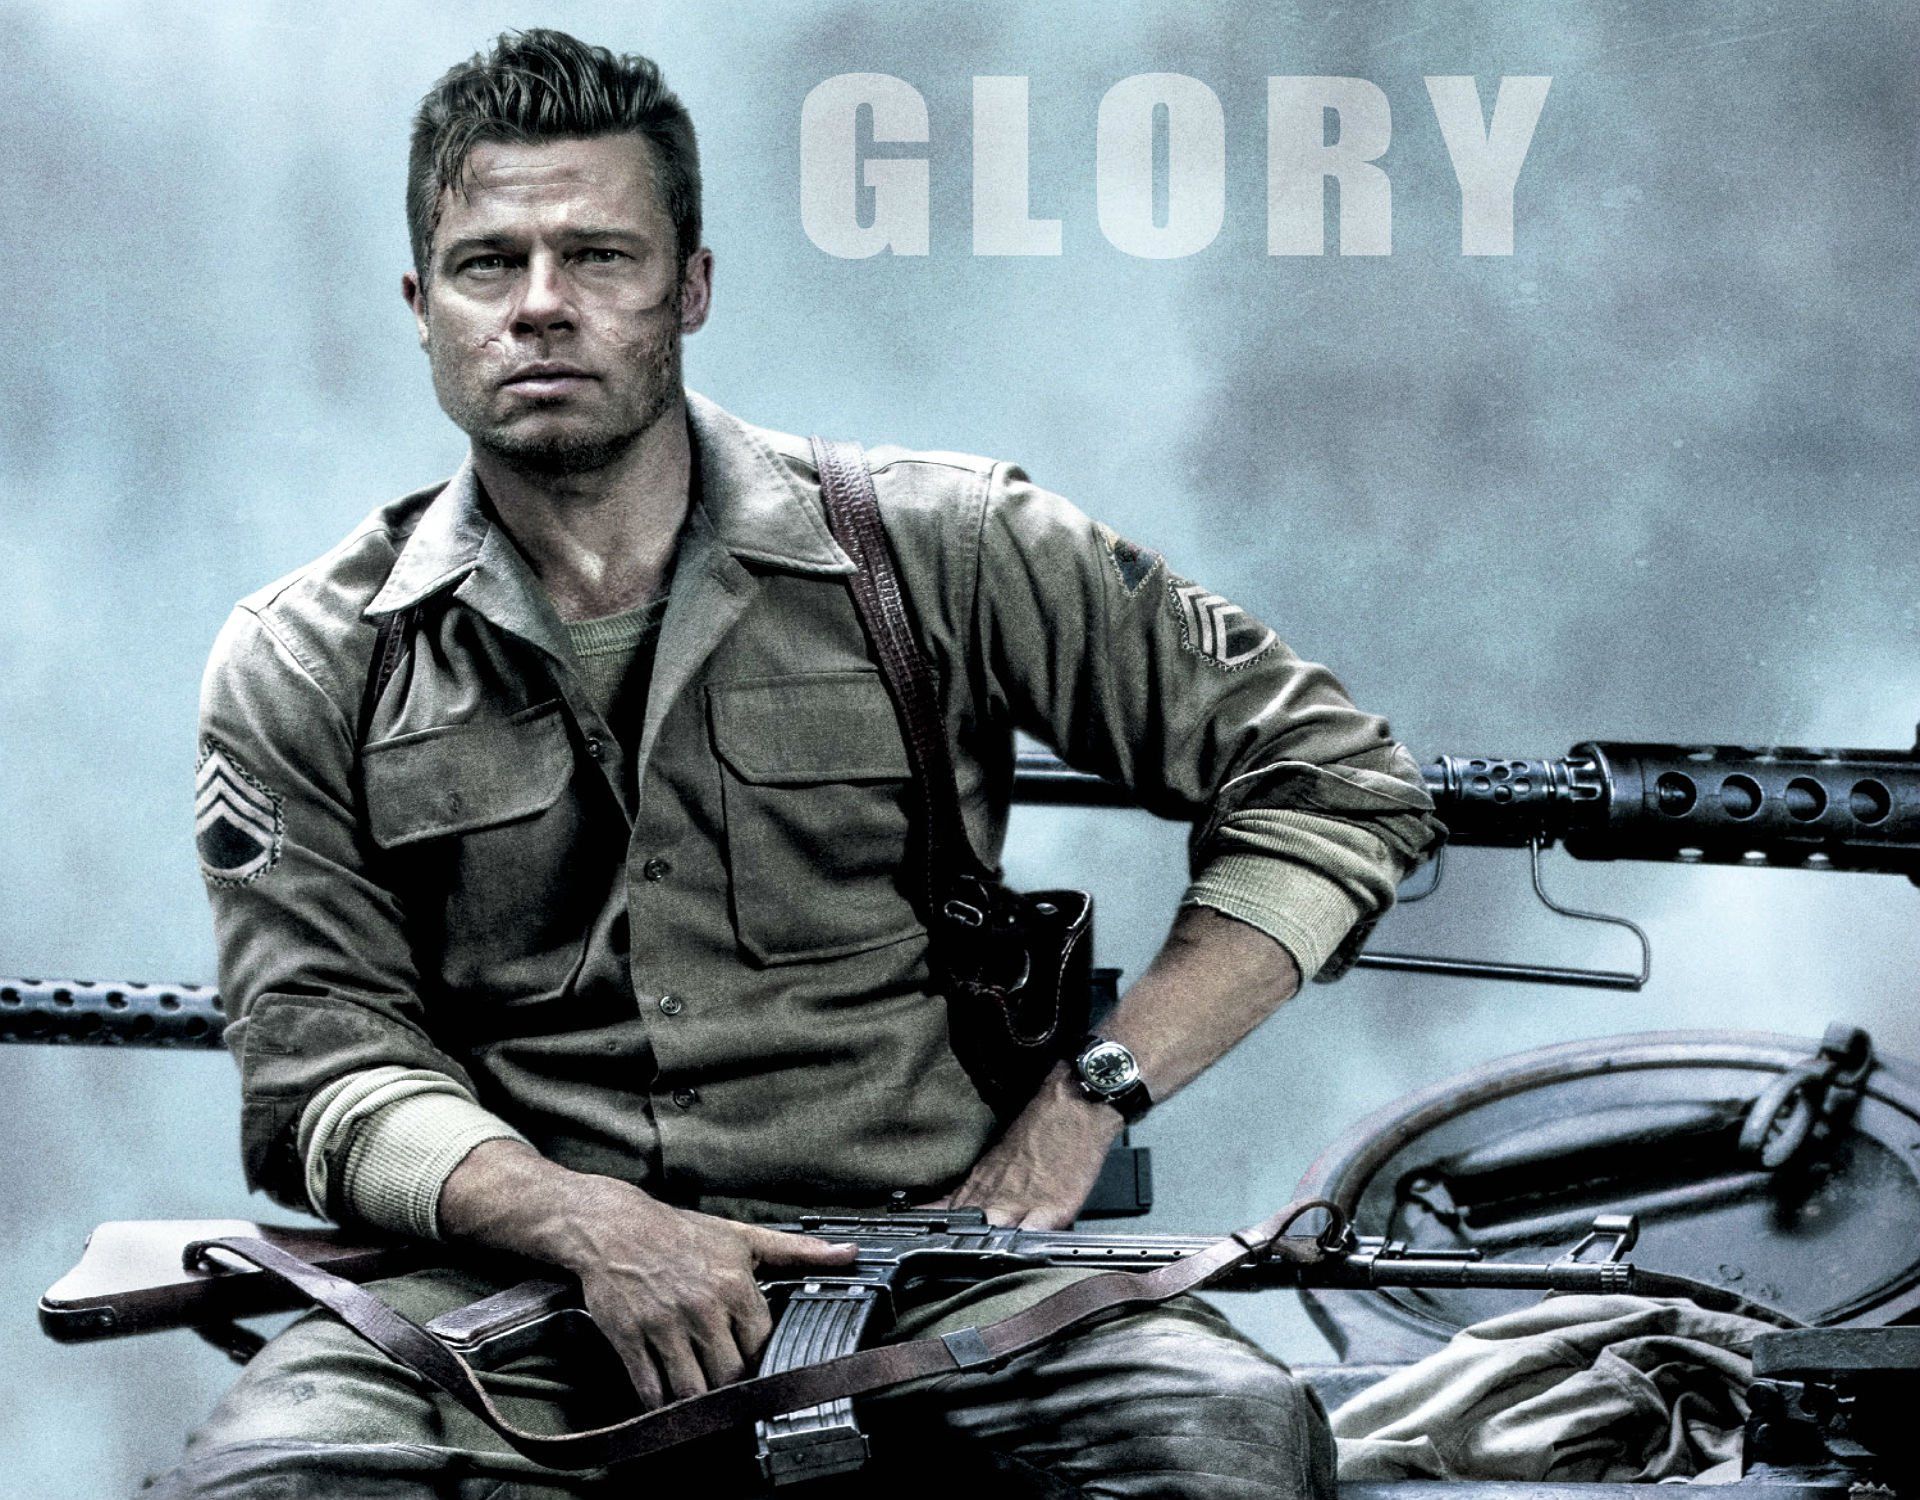 fury, Action, Drama, War, Brad, Pitt, Military, Tank Wallpapers HD / Desktop and Mobile Backgrounds